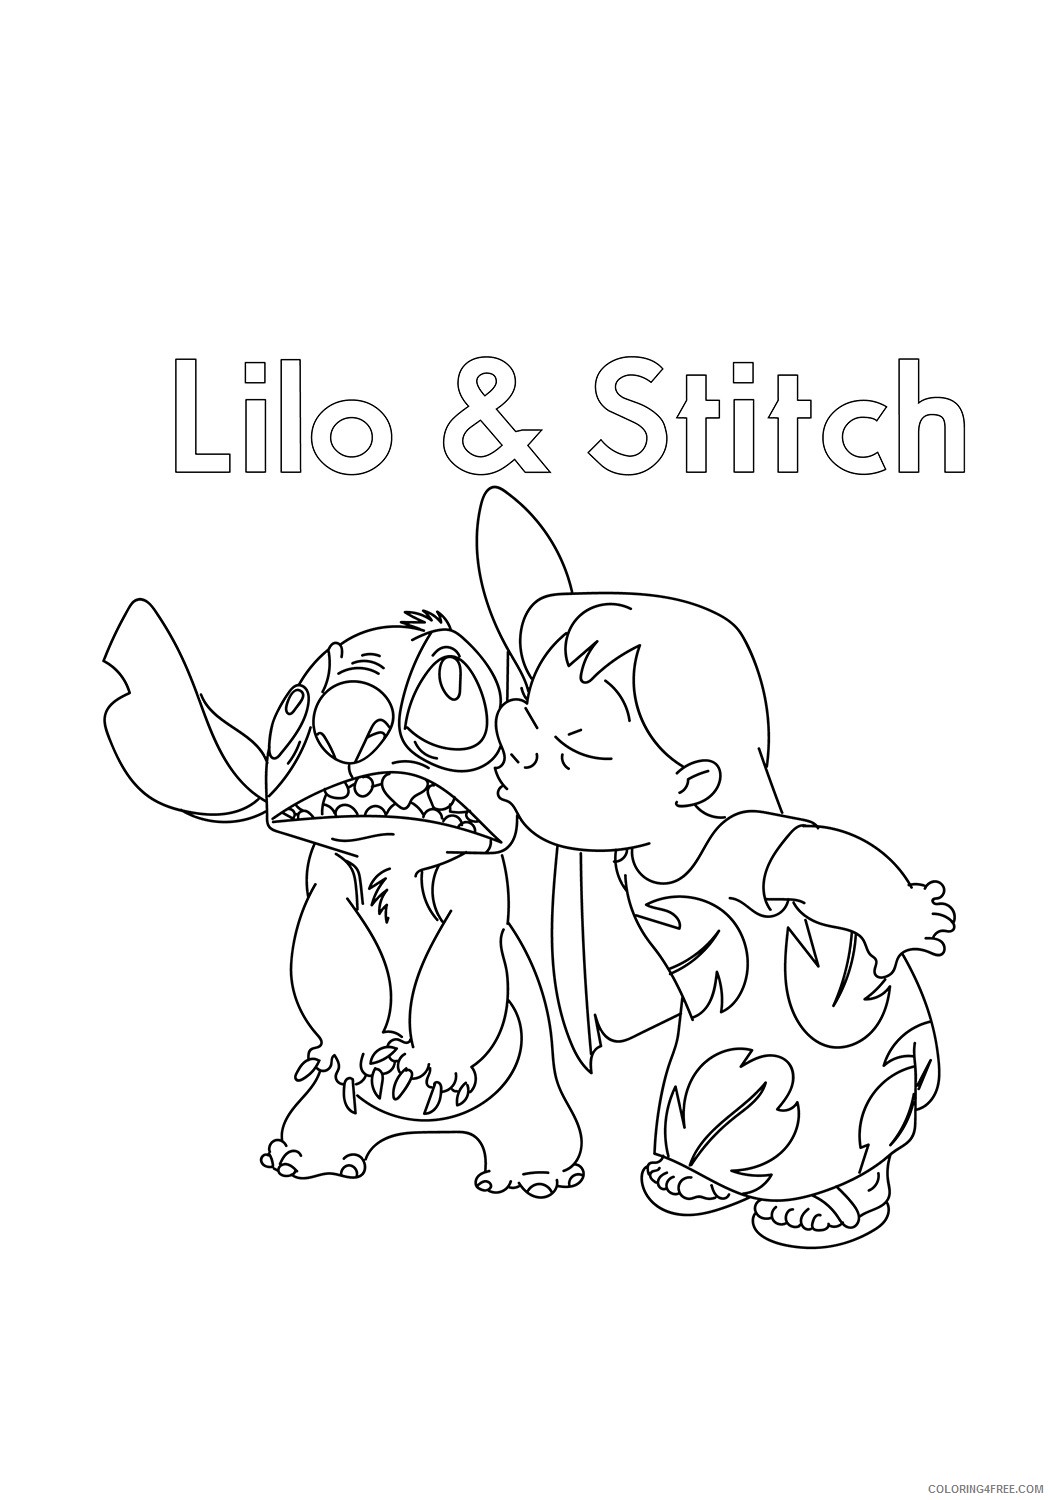 Lilo and Stitch Coloring Pages Cartoons 1526719273_lilo 17 a4 Printable 2020 3786 Coloring4free